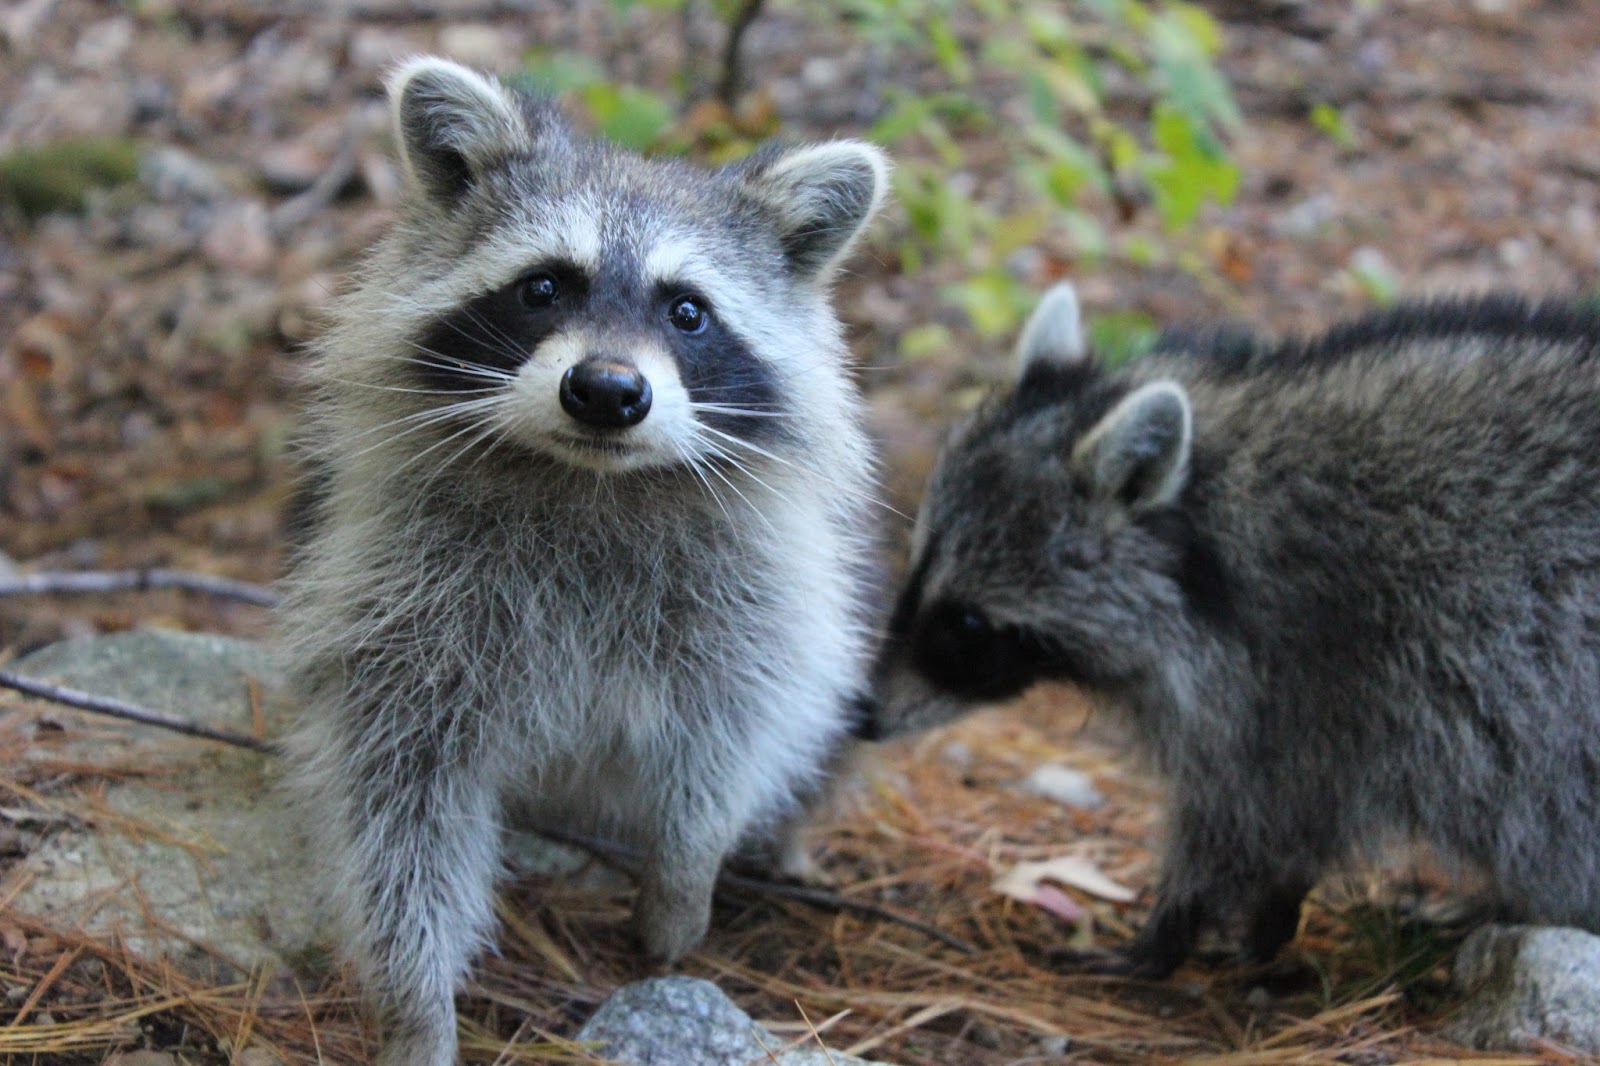 The Laughing Raccoon: Third raccoon release and stinker release!